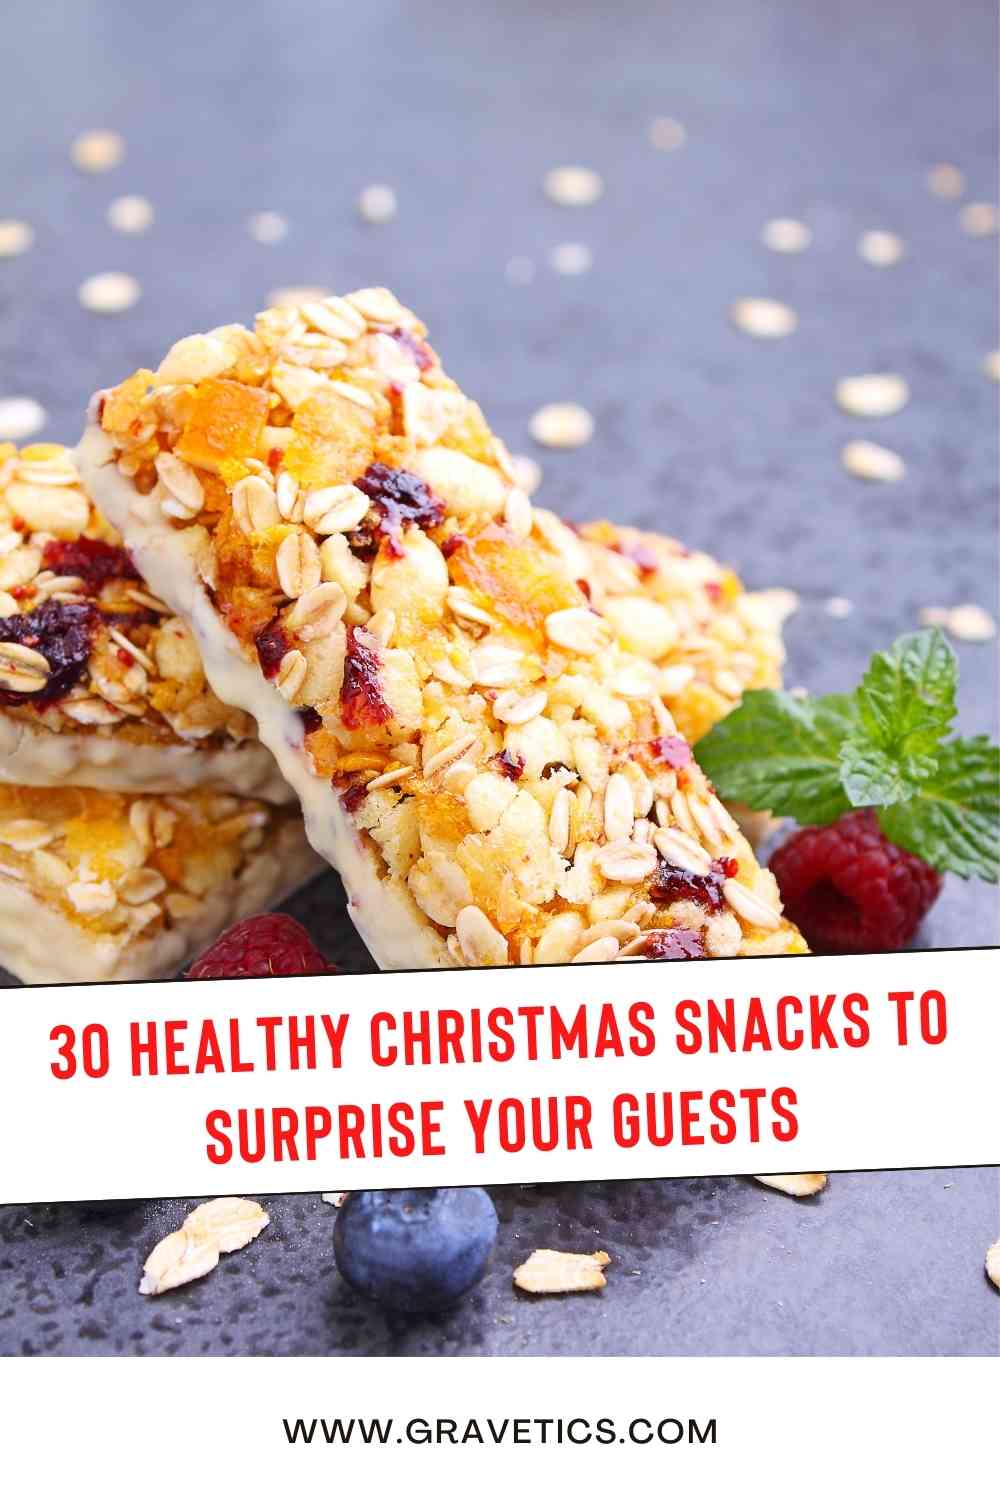 30 Healthy Christmas Snacks To Surprise Your Guests